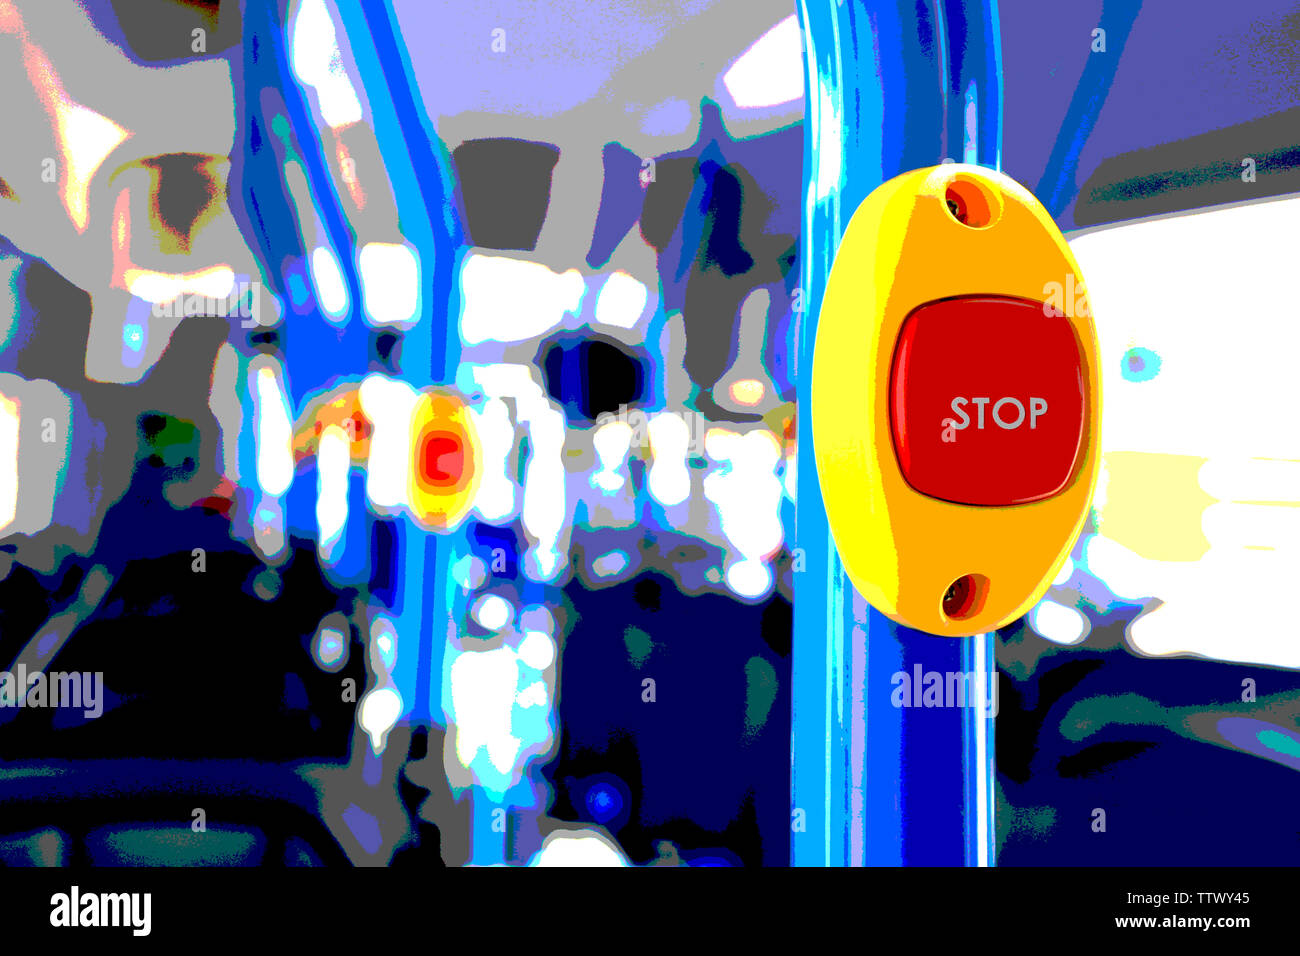 Stop button on a modern, colorful city bus close up. Filtered image. Stock Photo